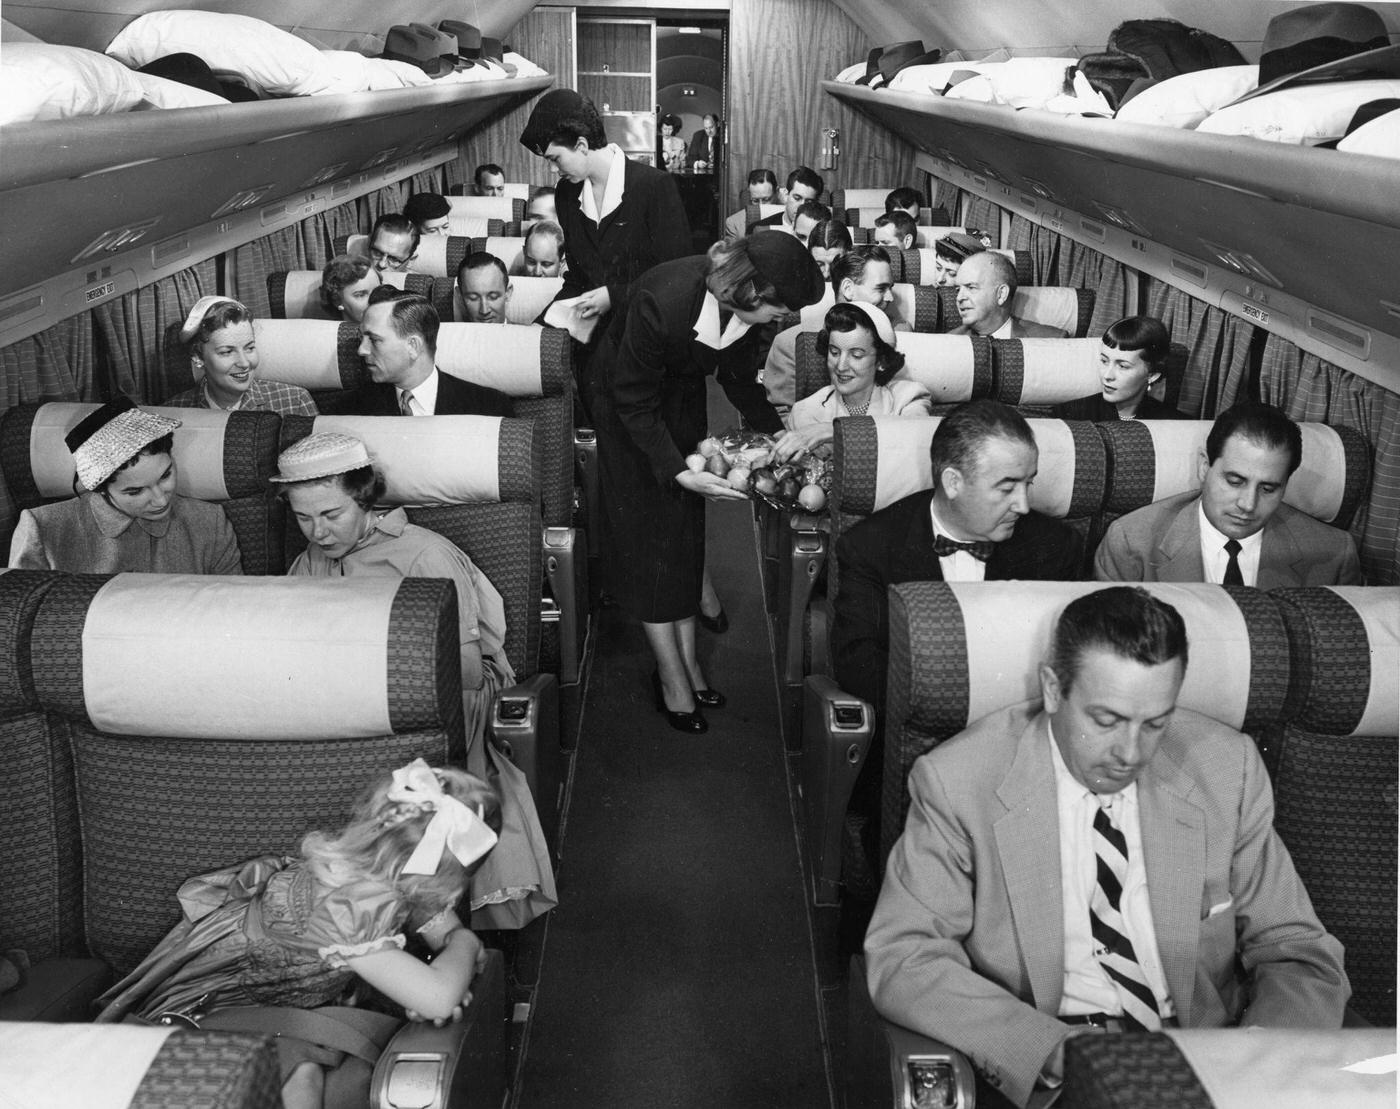 In 1955, an interior view of the passenger cabin of a Douglas DC-7 Mainliner airplane shows a pair of flight attendants serving travelers.